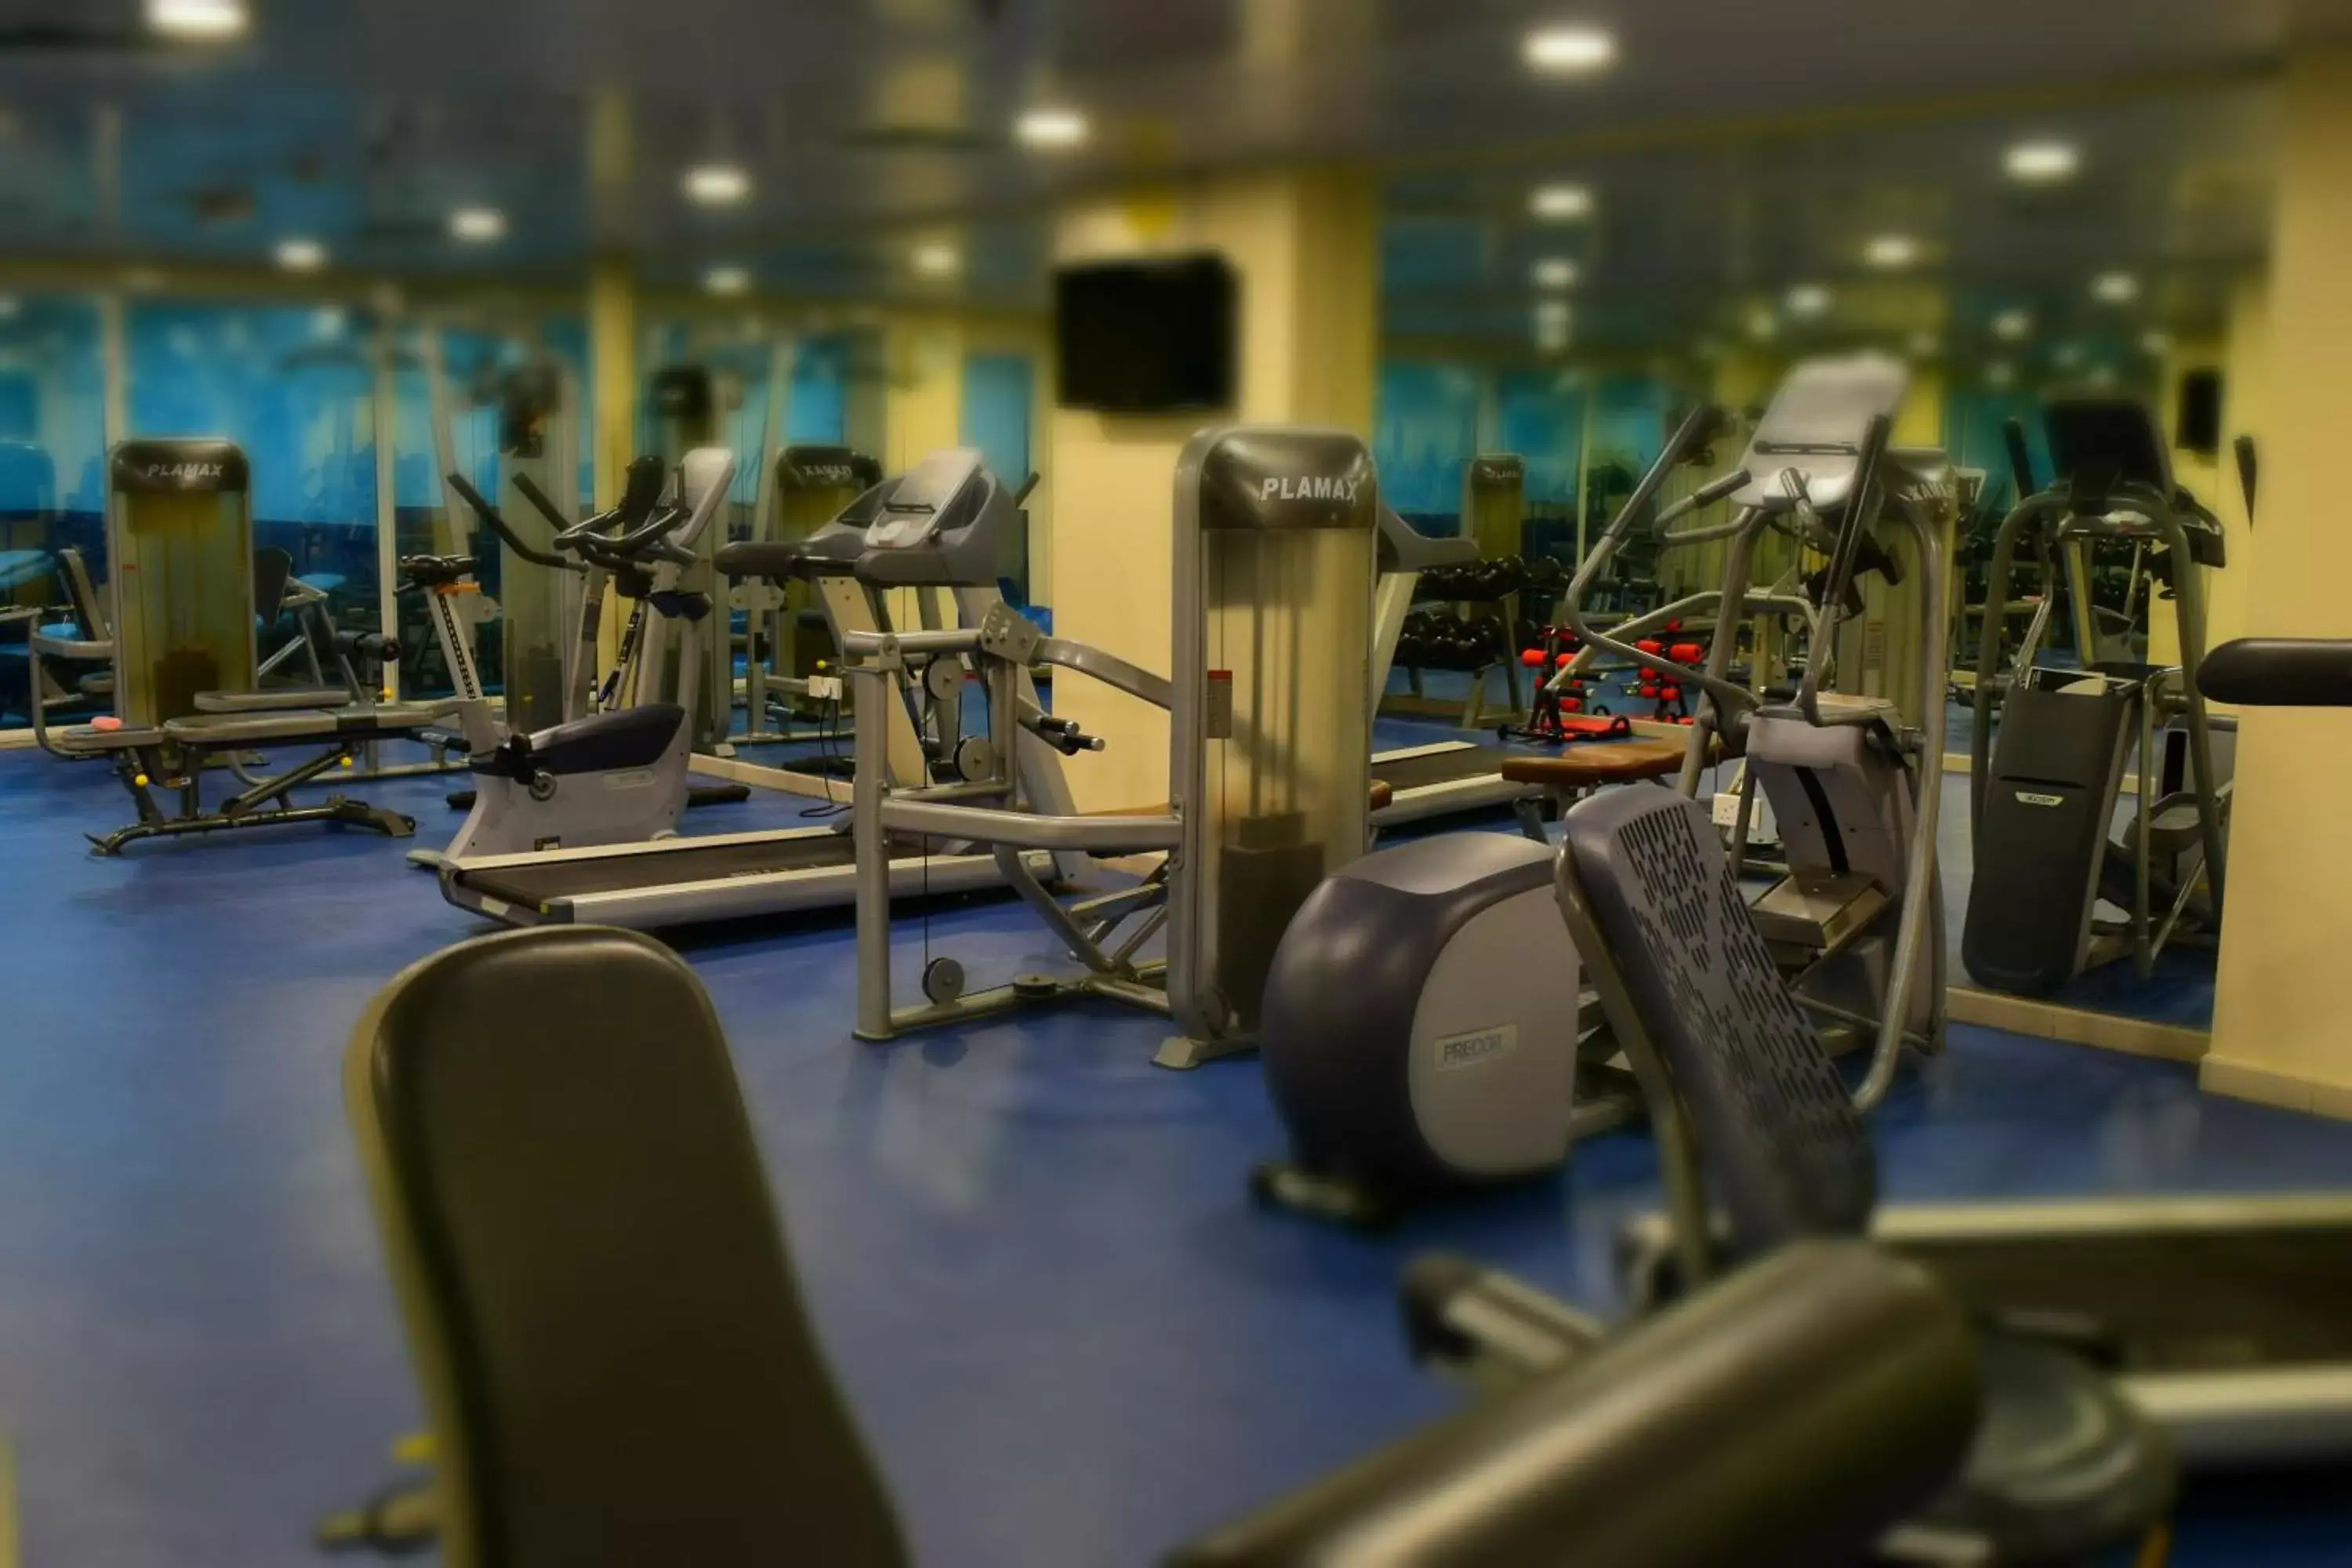 Activities, Fitness Center/Facilities in Kingsgate Hotel Doha by Millennium Hotels.